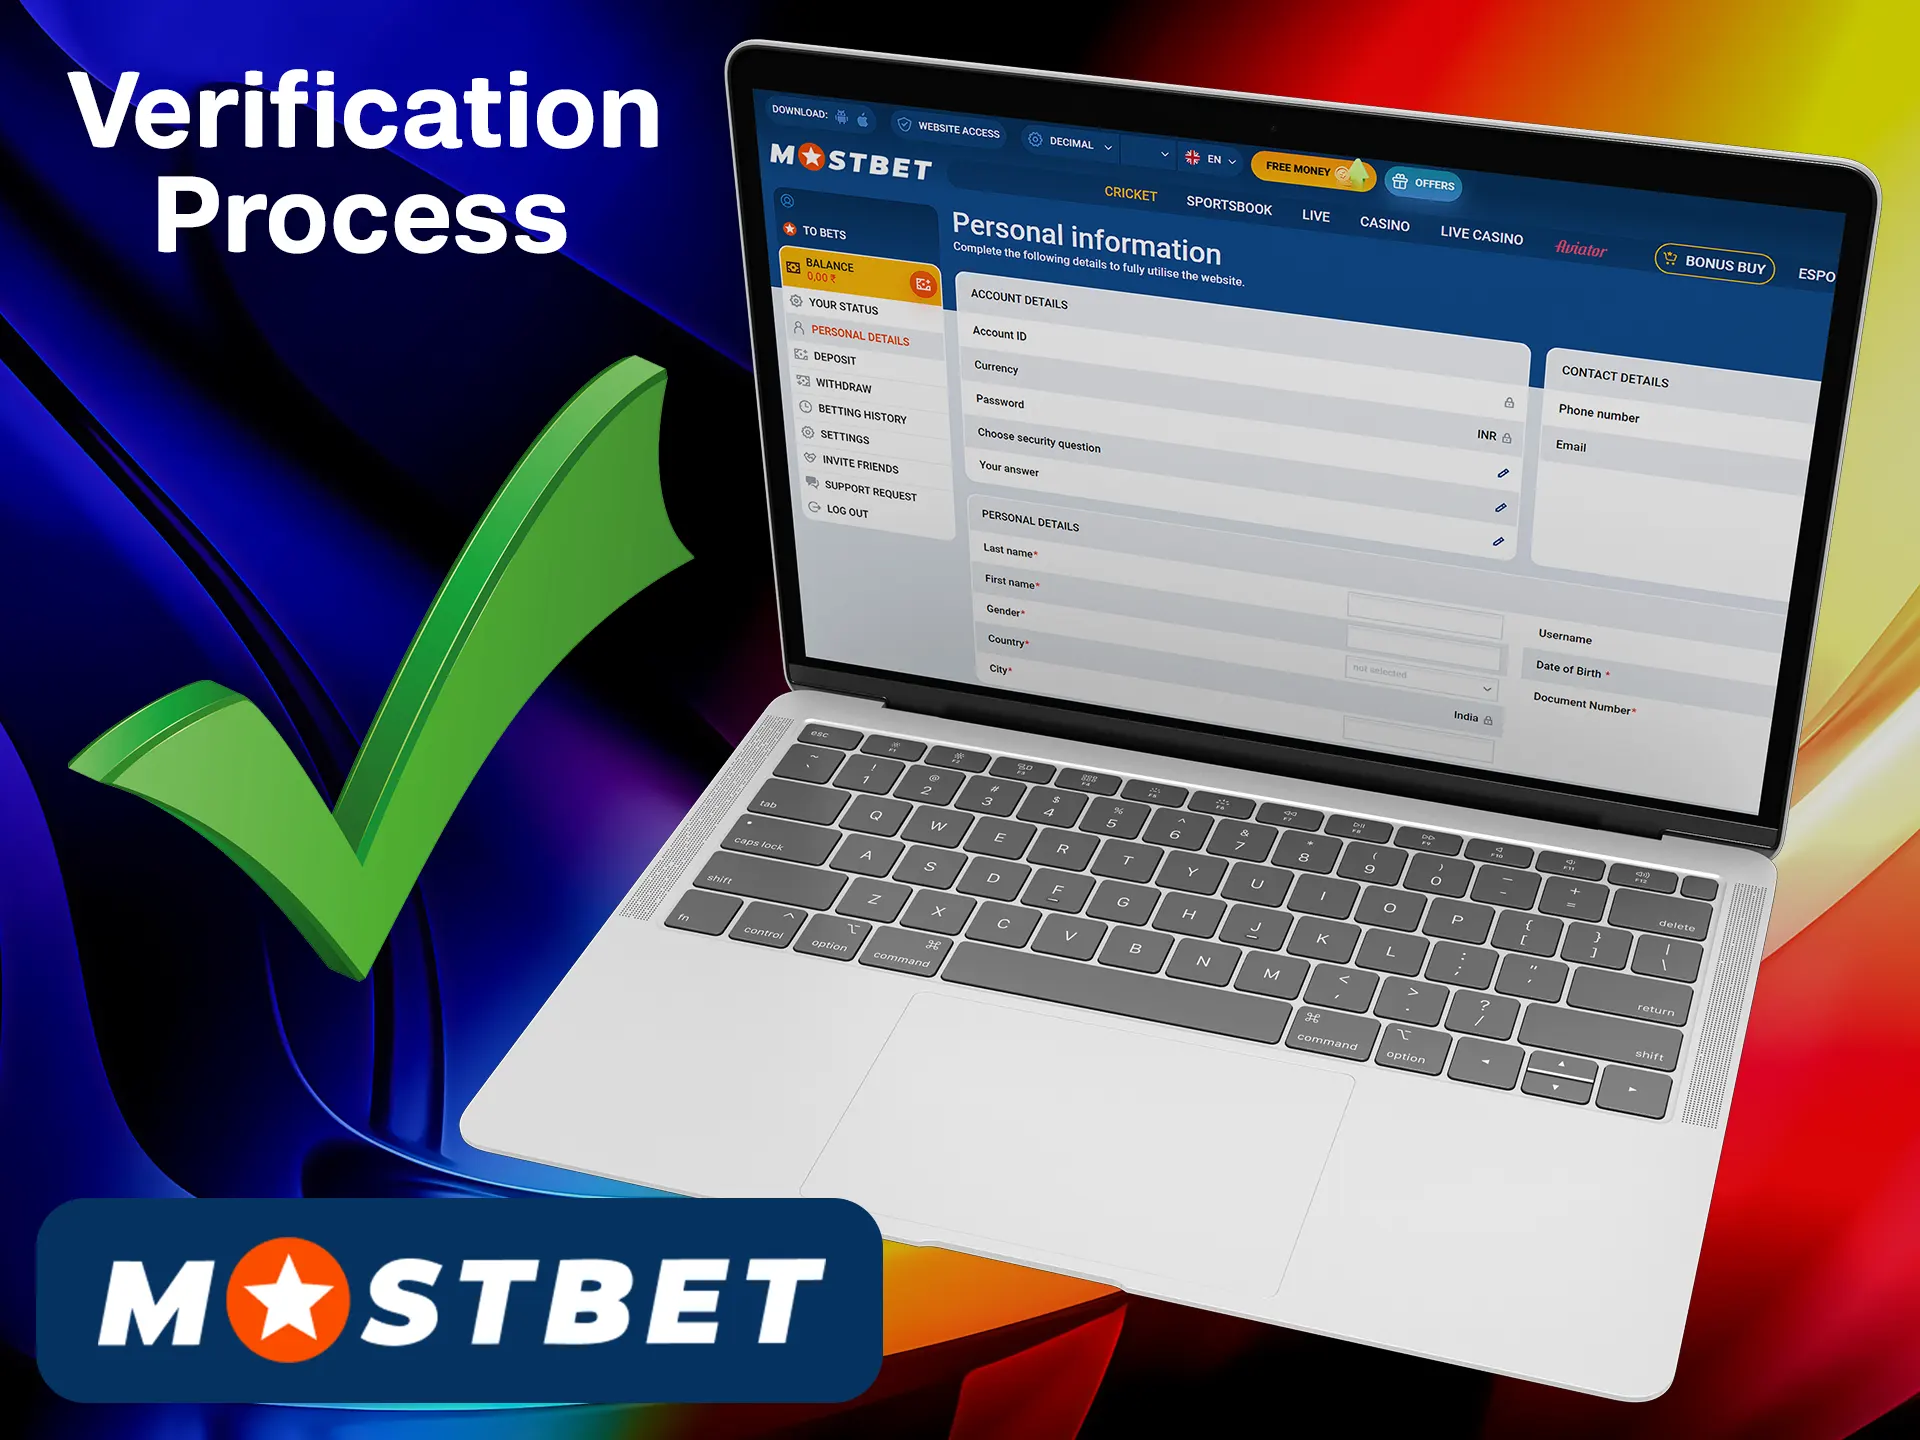 Verify your Mostbet account by providing the required data.